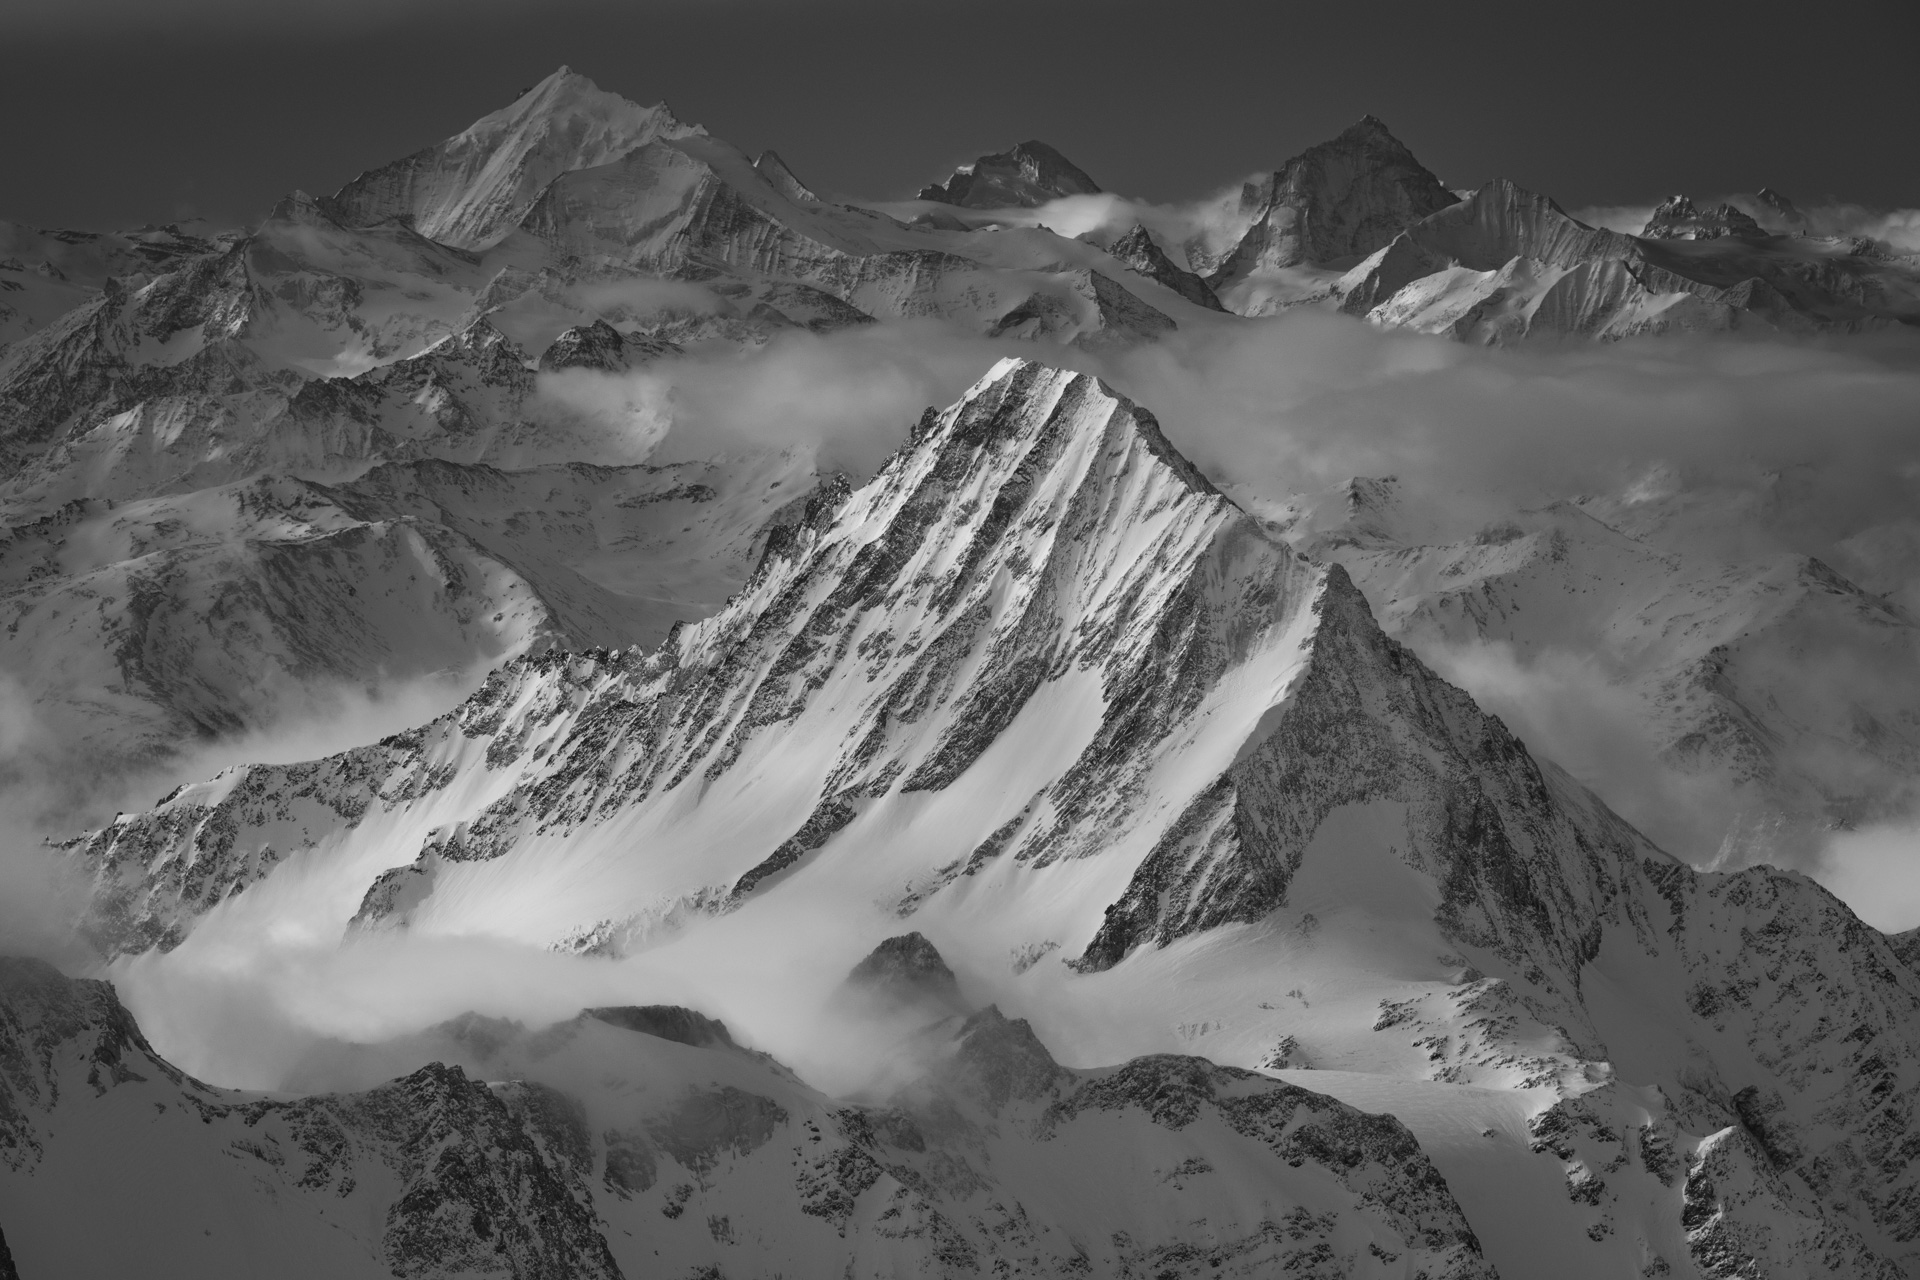 black and white mountain landscape photo - Bietschhorn - Weisshorn - The Dent d'Herens - The Dent Blanche - Grand Cornier